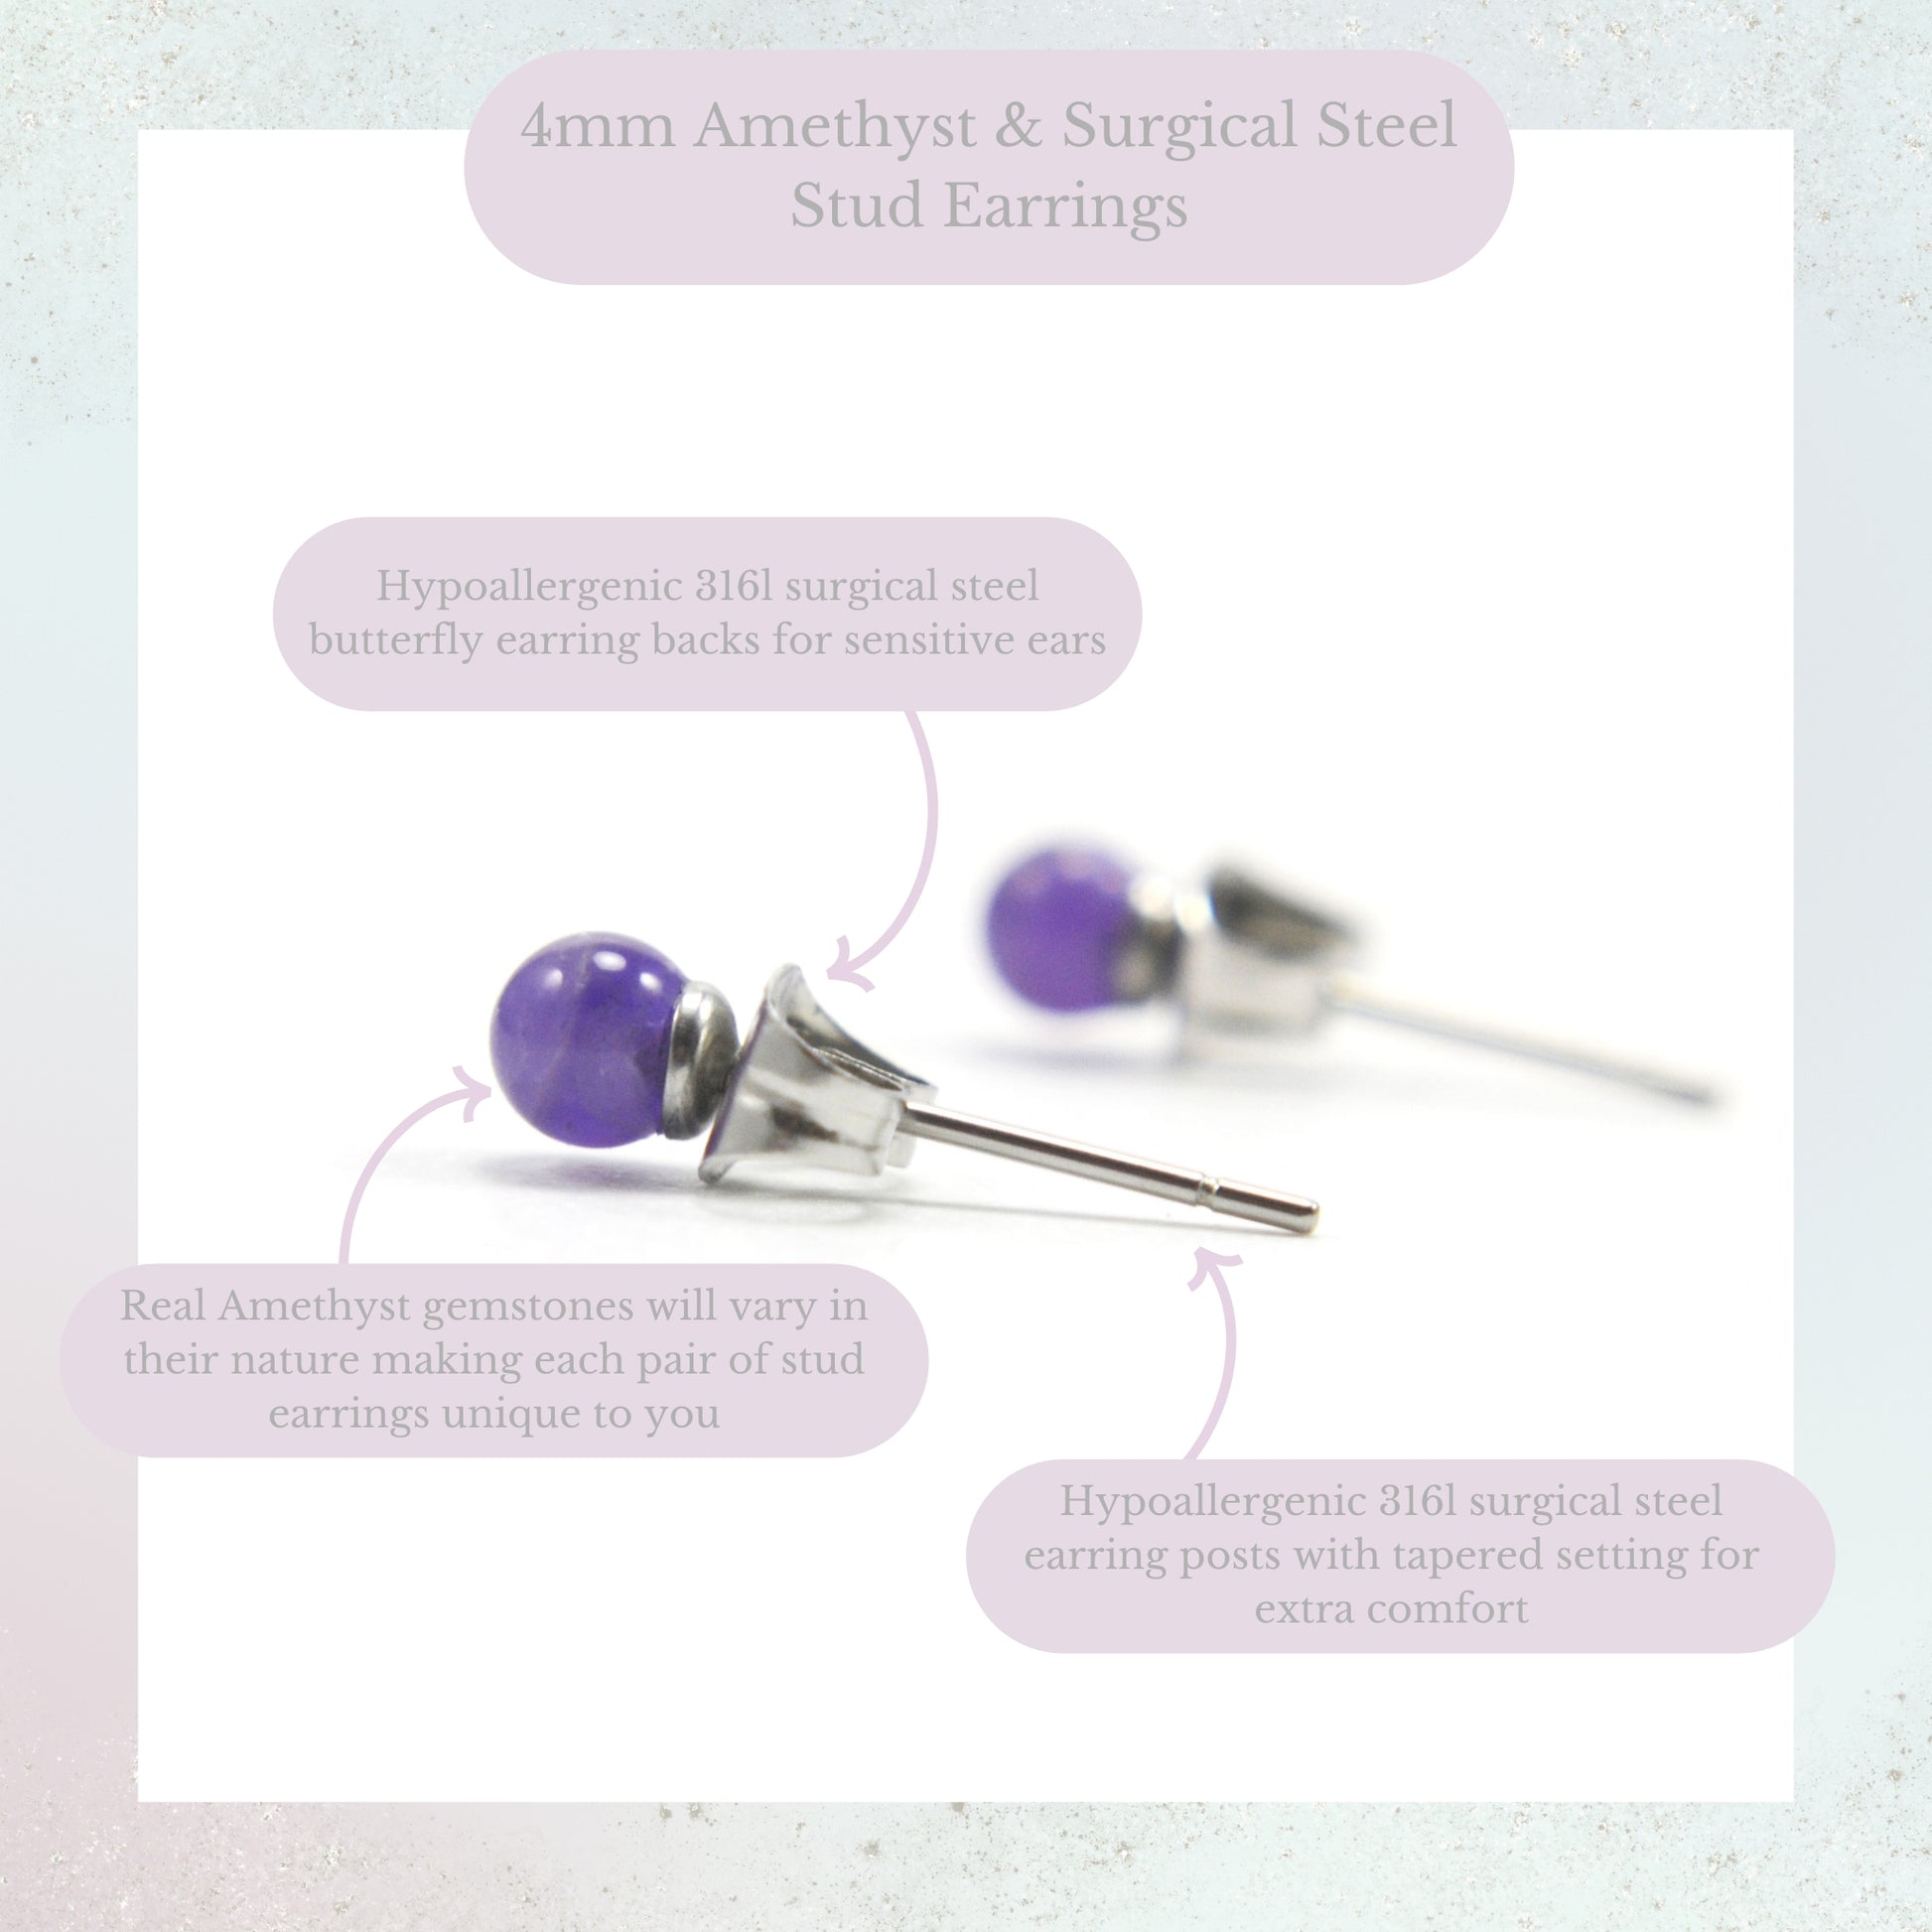 Product information graphic for 4mm Amethyst & surgical steel stud earrings